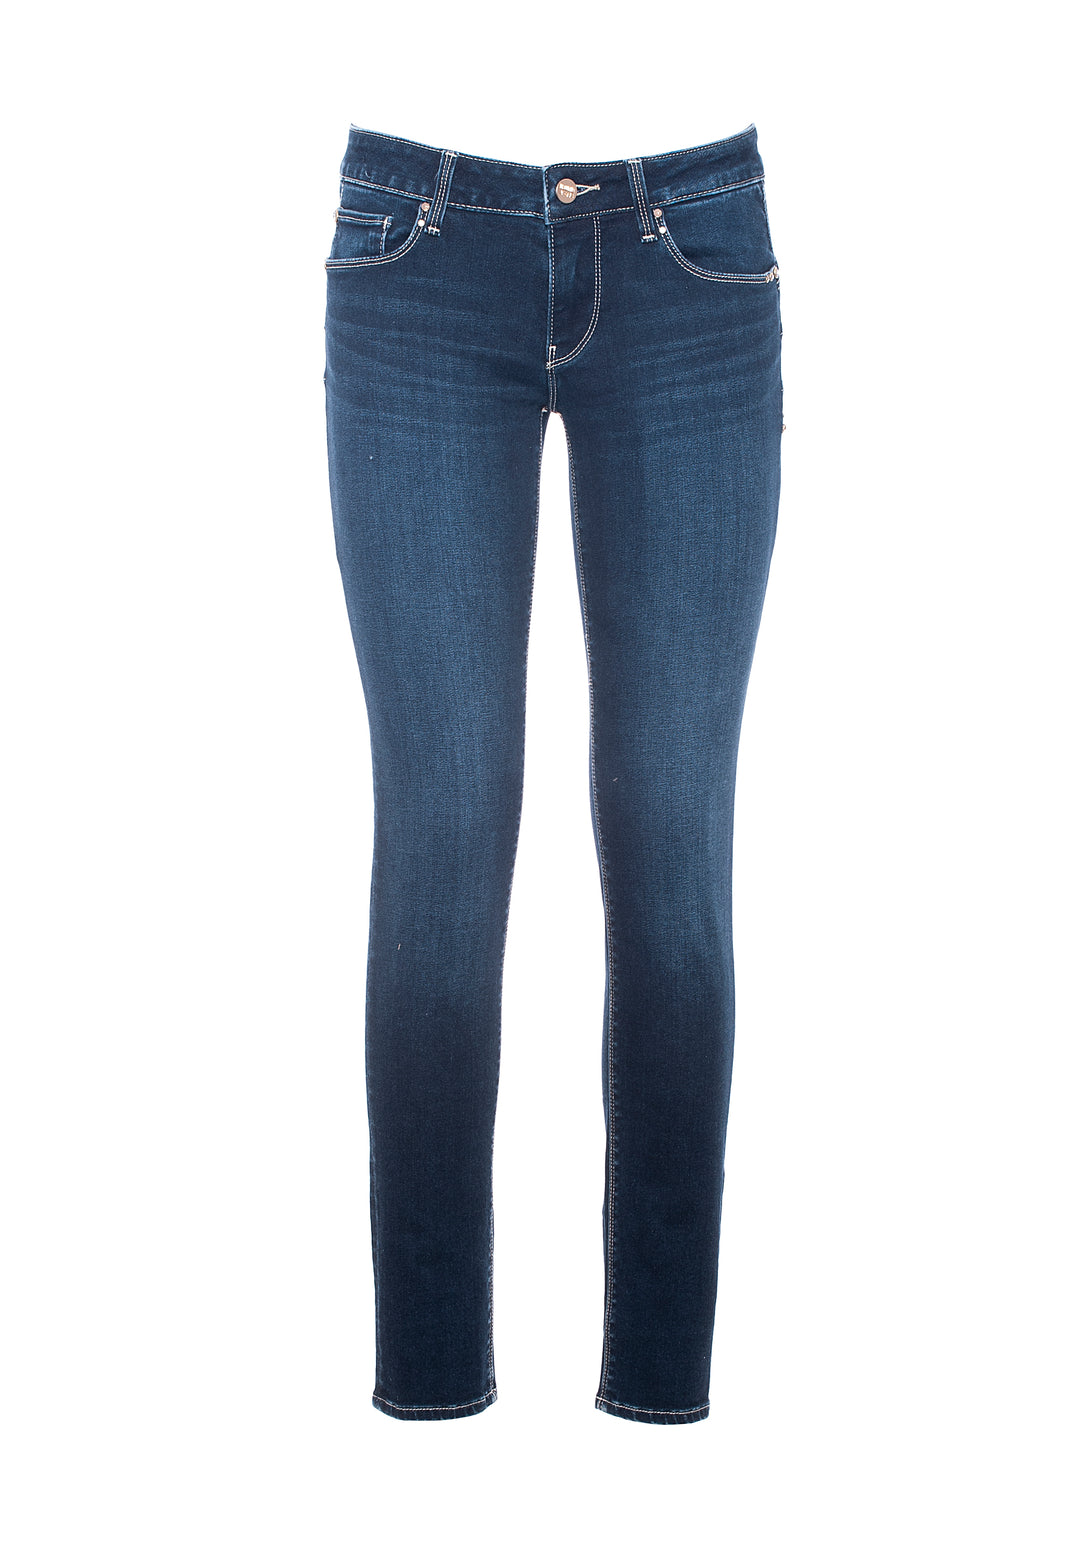 Jeans skinny fit with push-up effect made in stretch denim with dark blue wash Fracomina FP21SP5009D40801-117